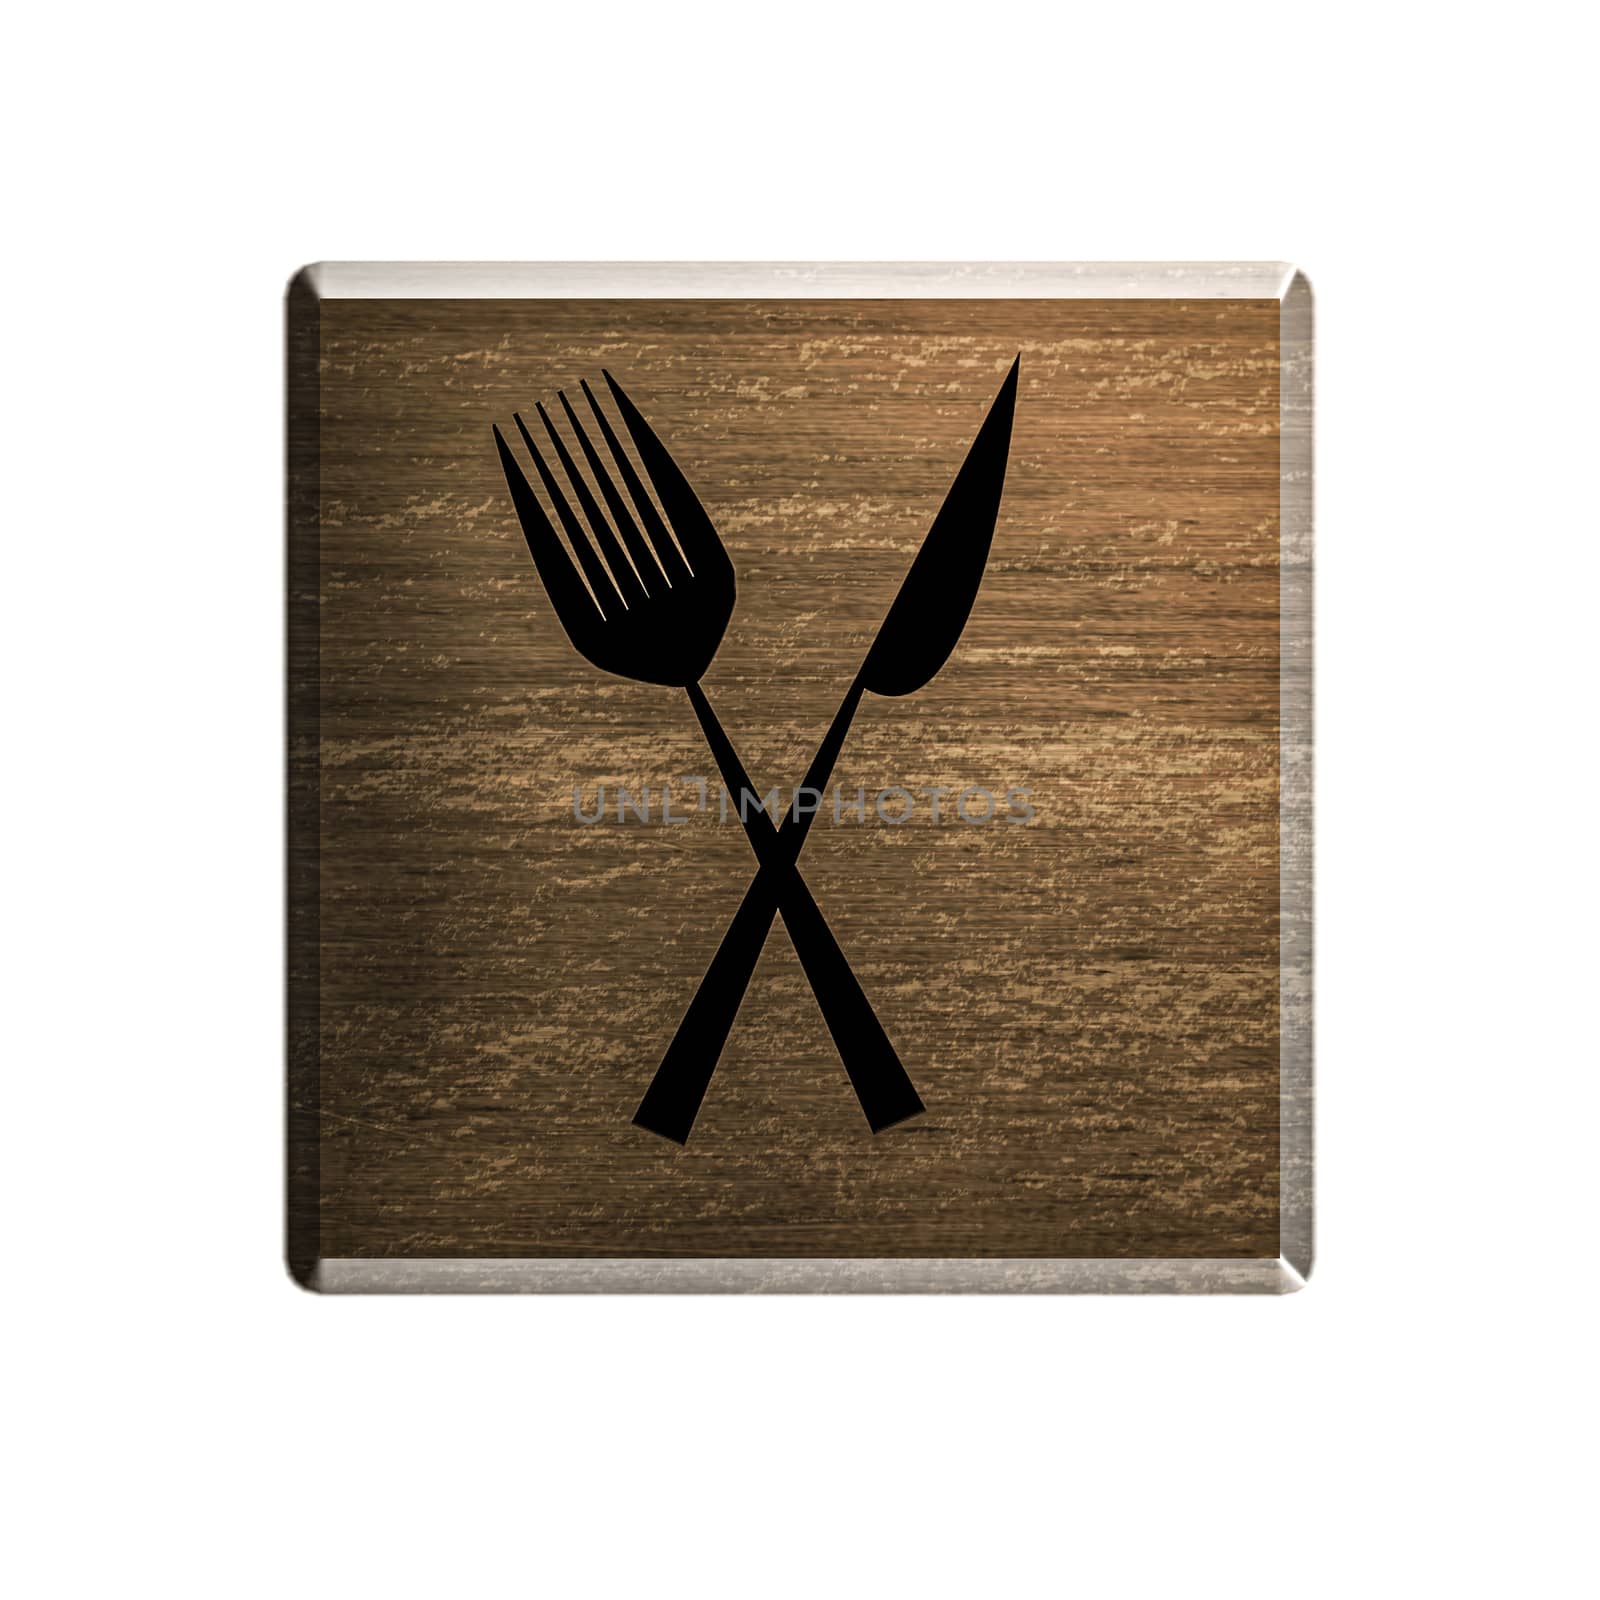 Illustration. Hotel wooden badge with cutlery symbol. Meals available.